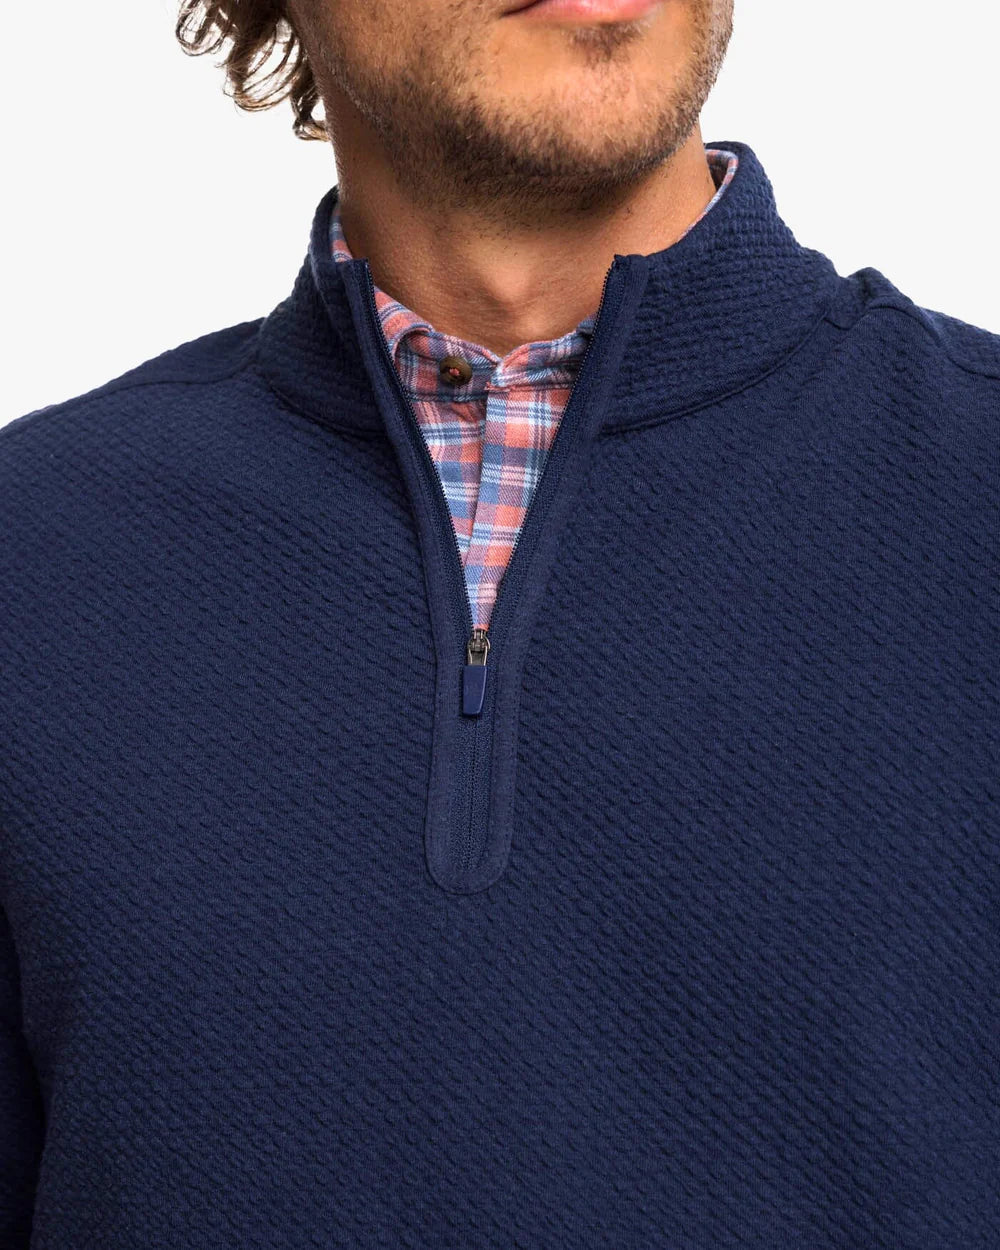 Southern Tide Heather Outbound Quarter Zip